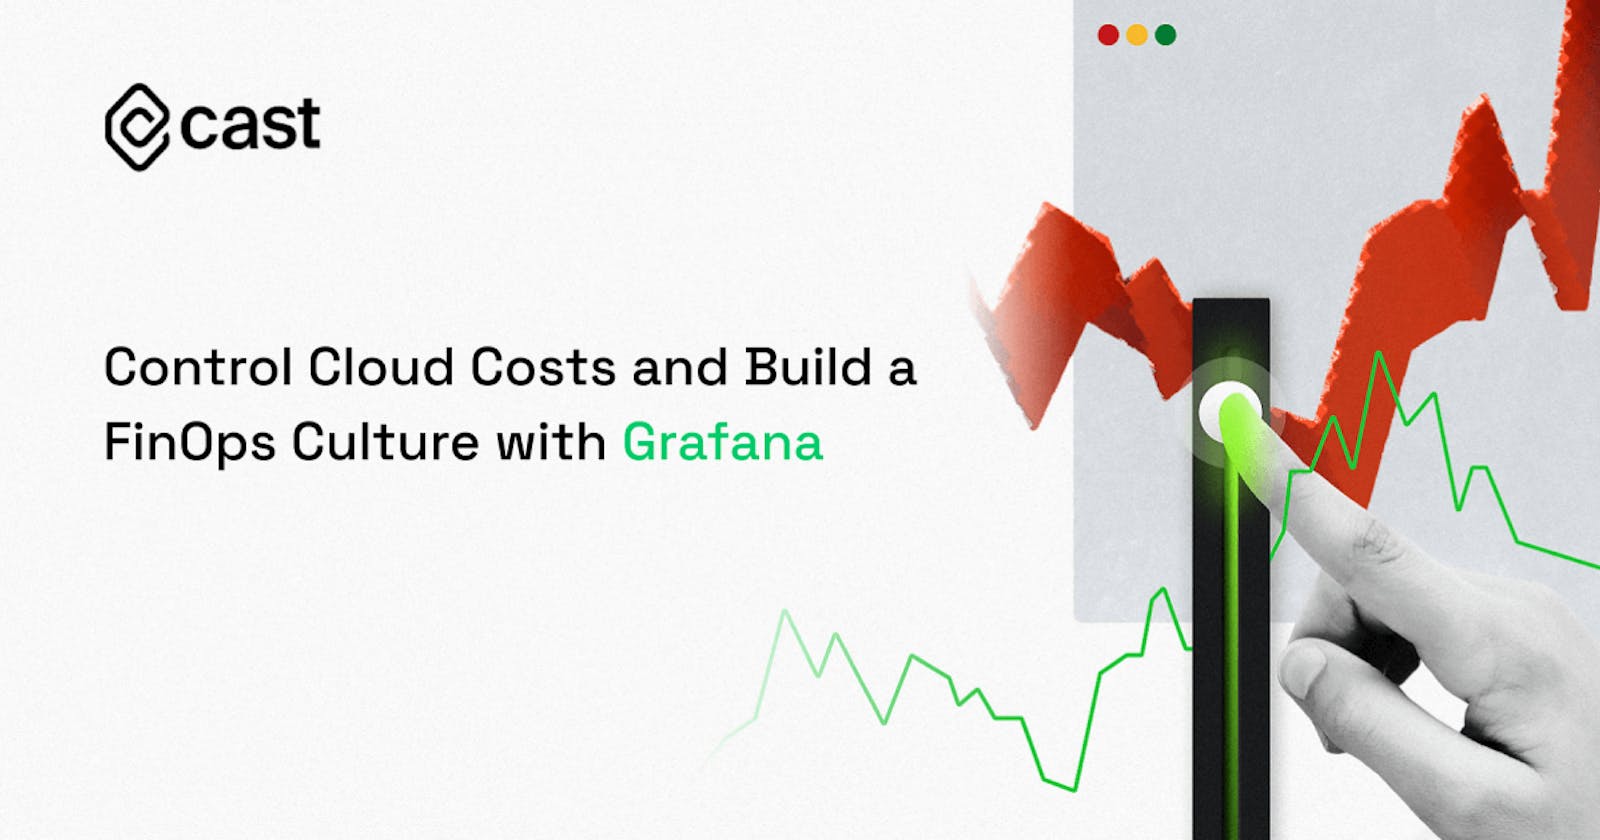 Control Cloud Costs and Build a FinOps Culture with Grafana